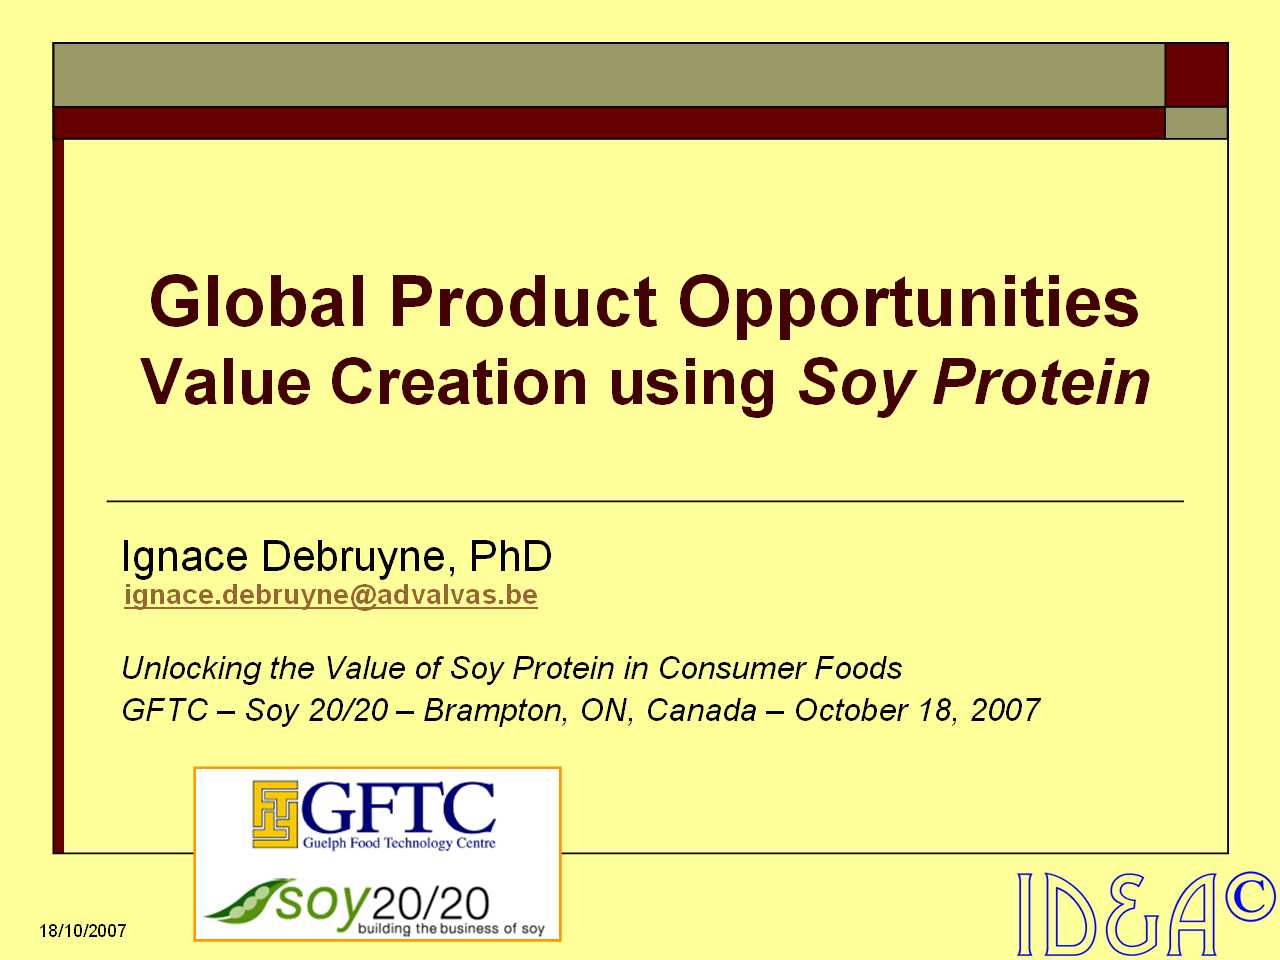 Soy Protein Market Opportunities